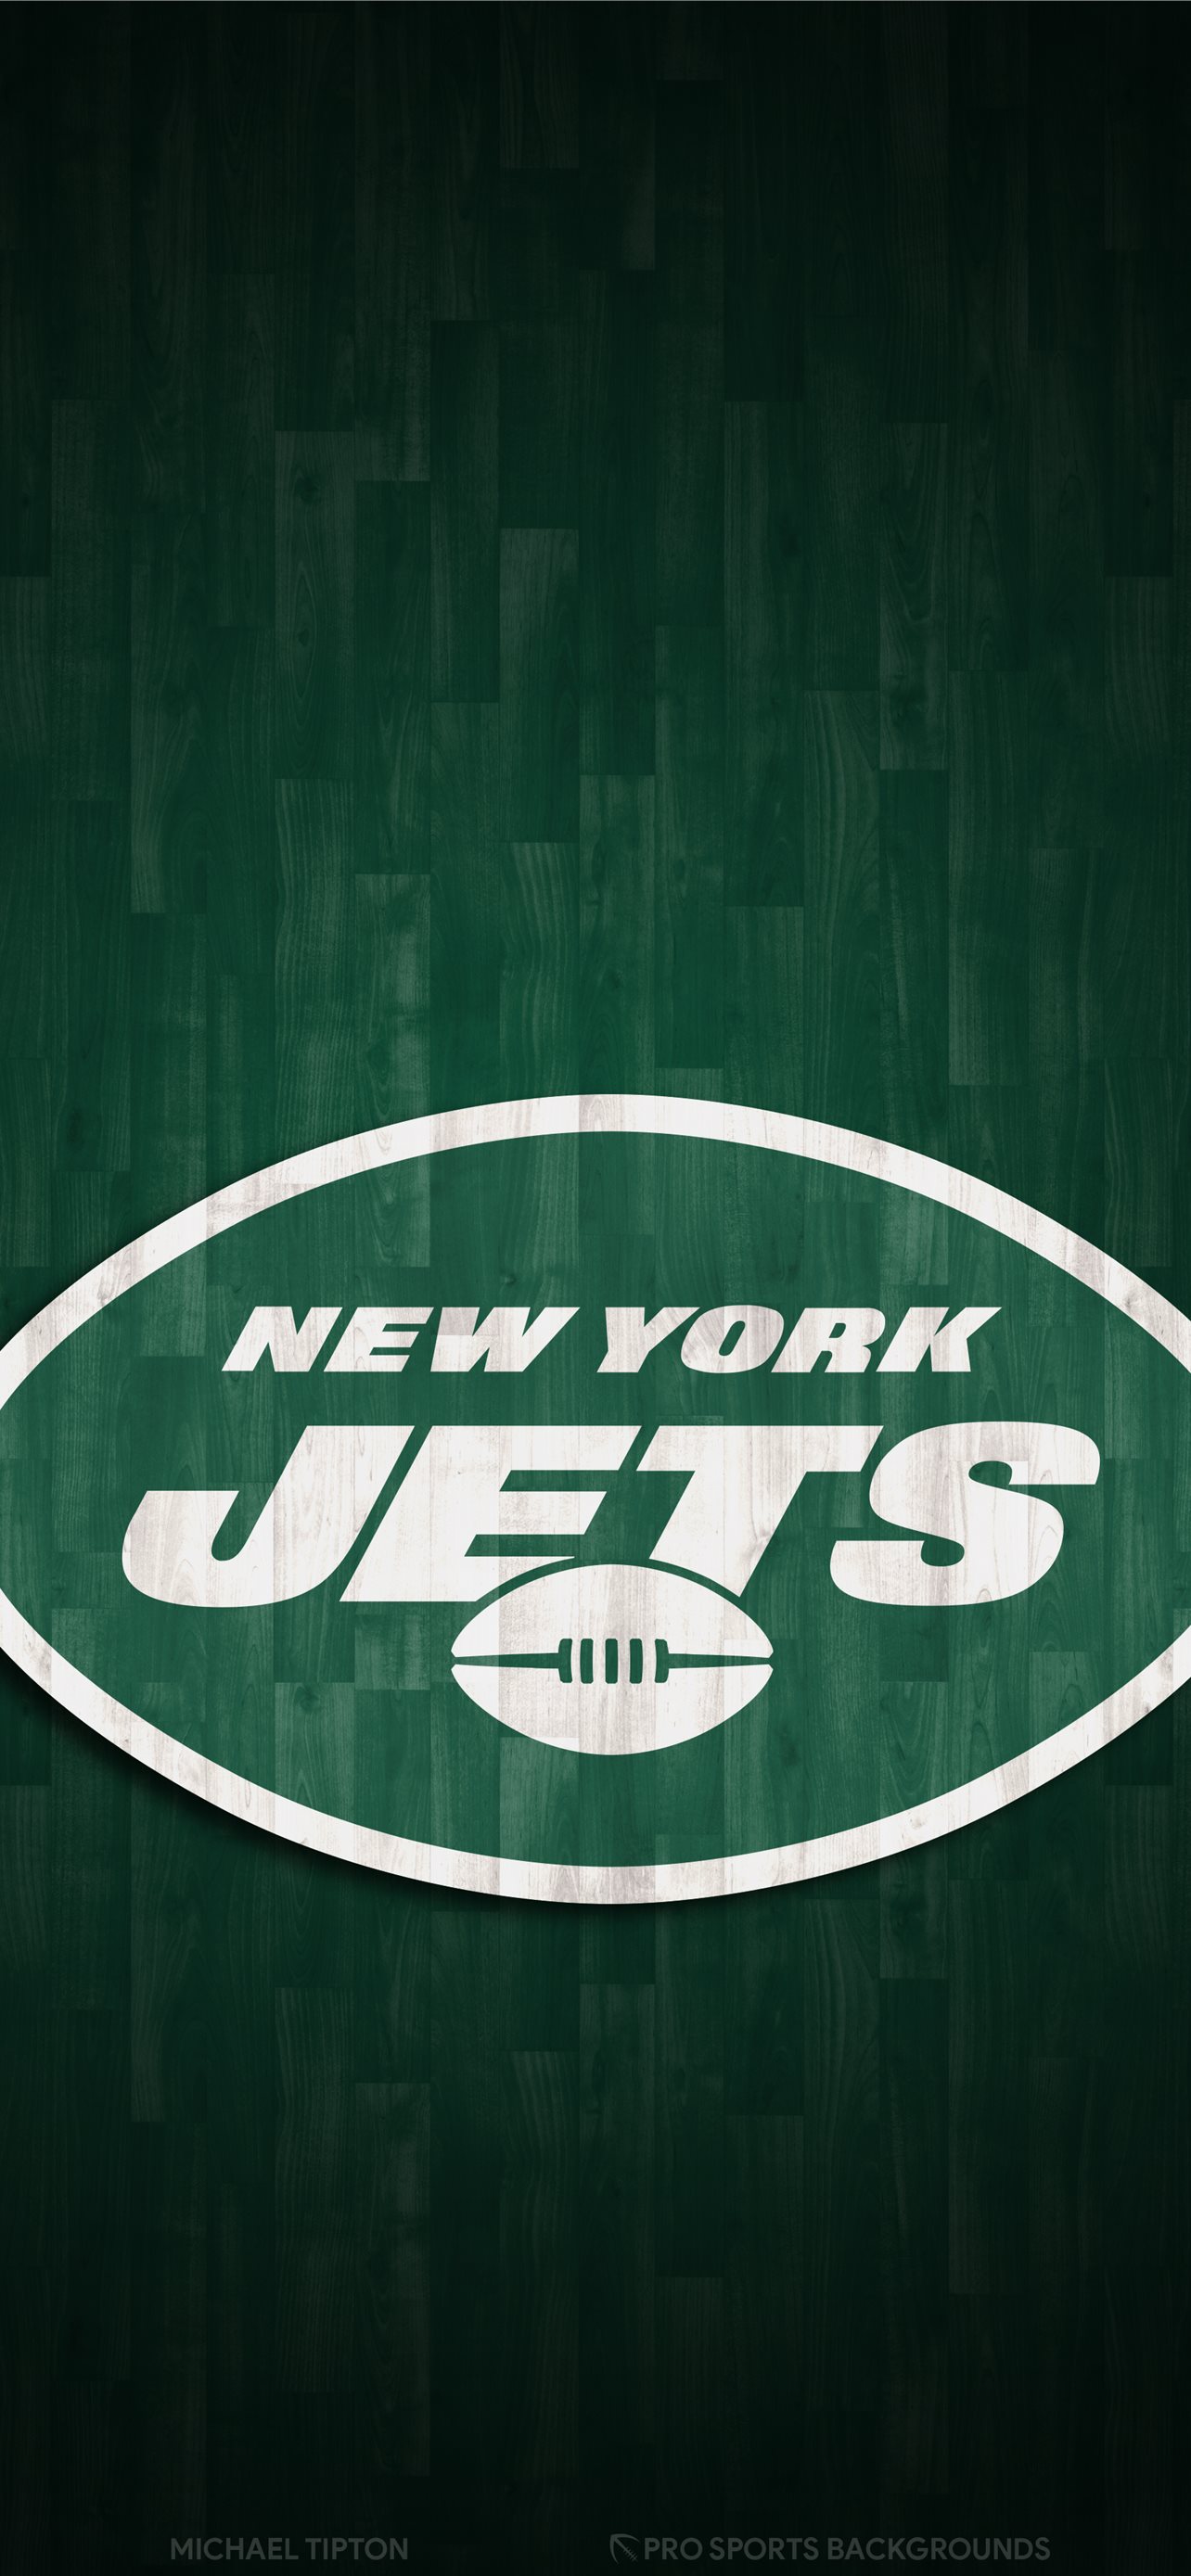 New York Giants Iphone Wallpapers Free Download